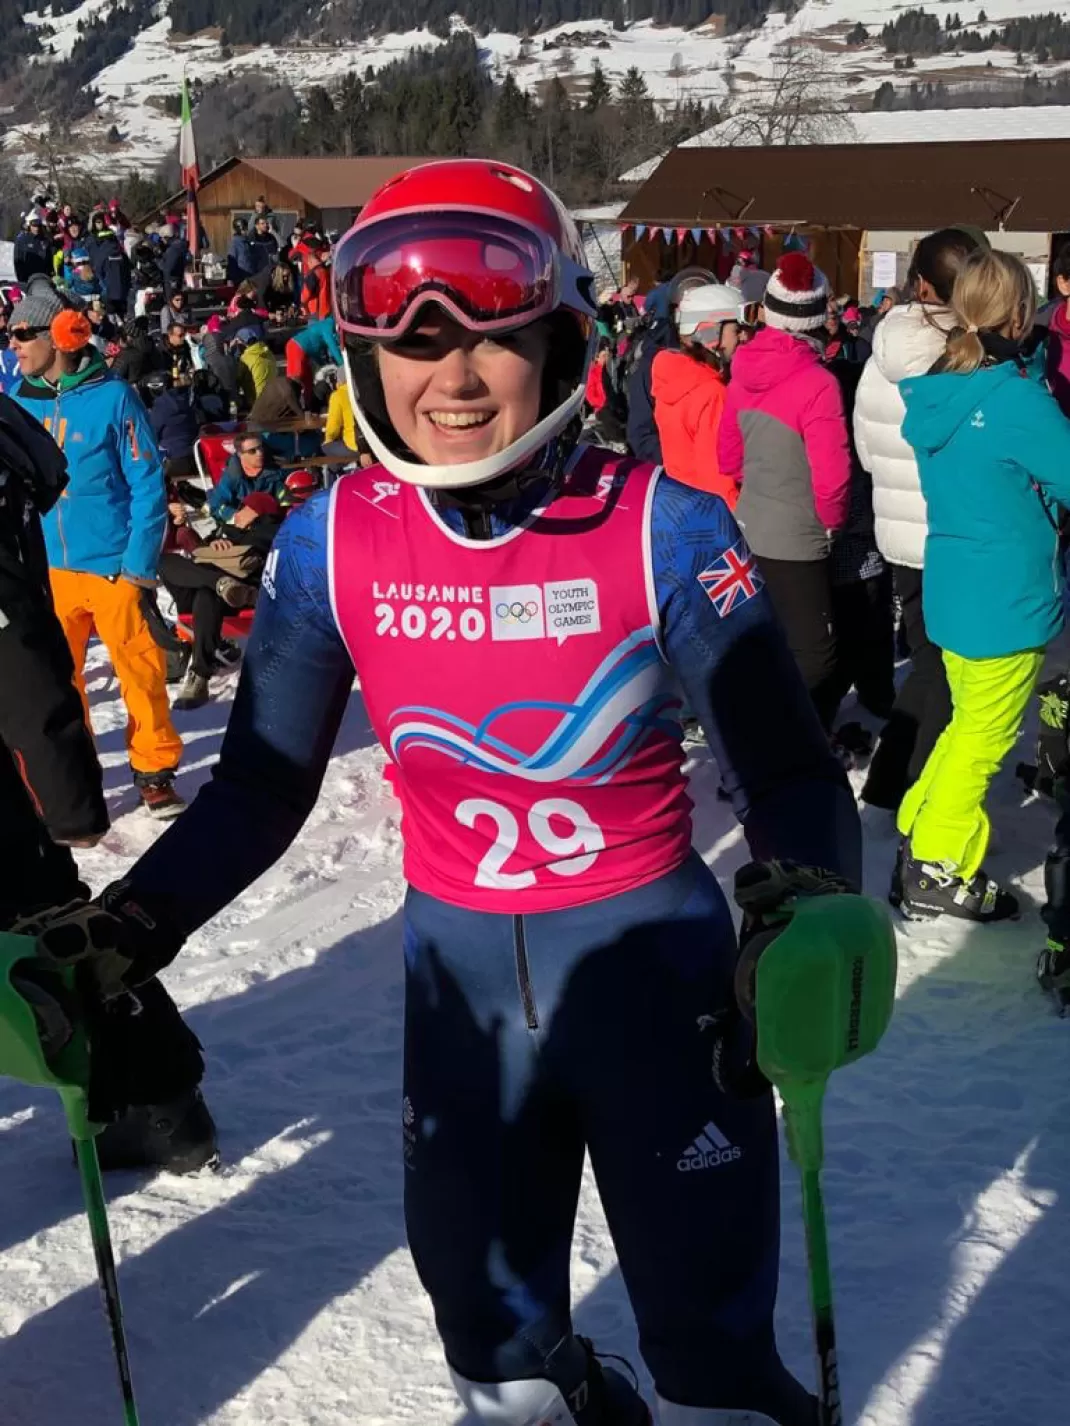 Sophie skis for Team GB at Youth Olympic Games